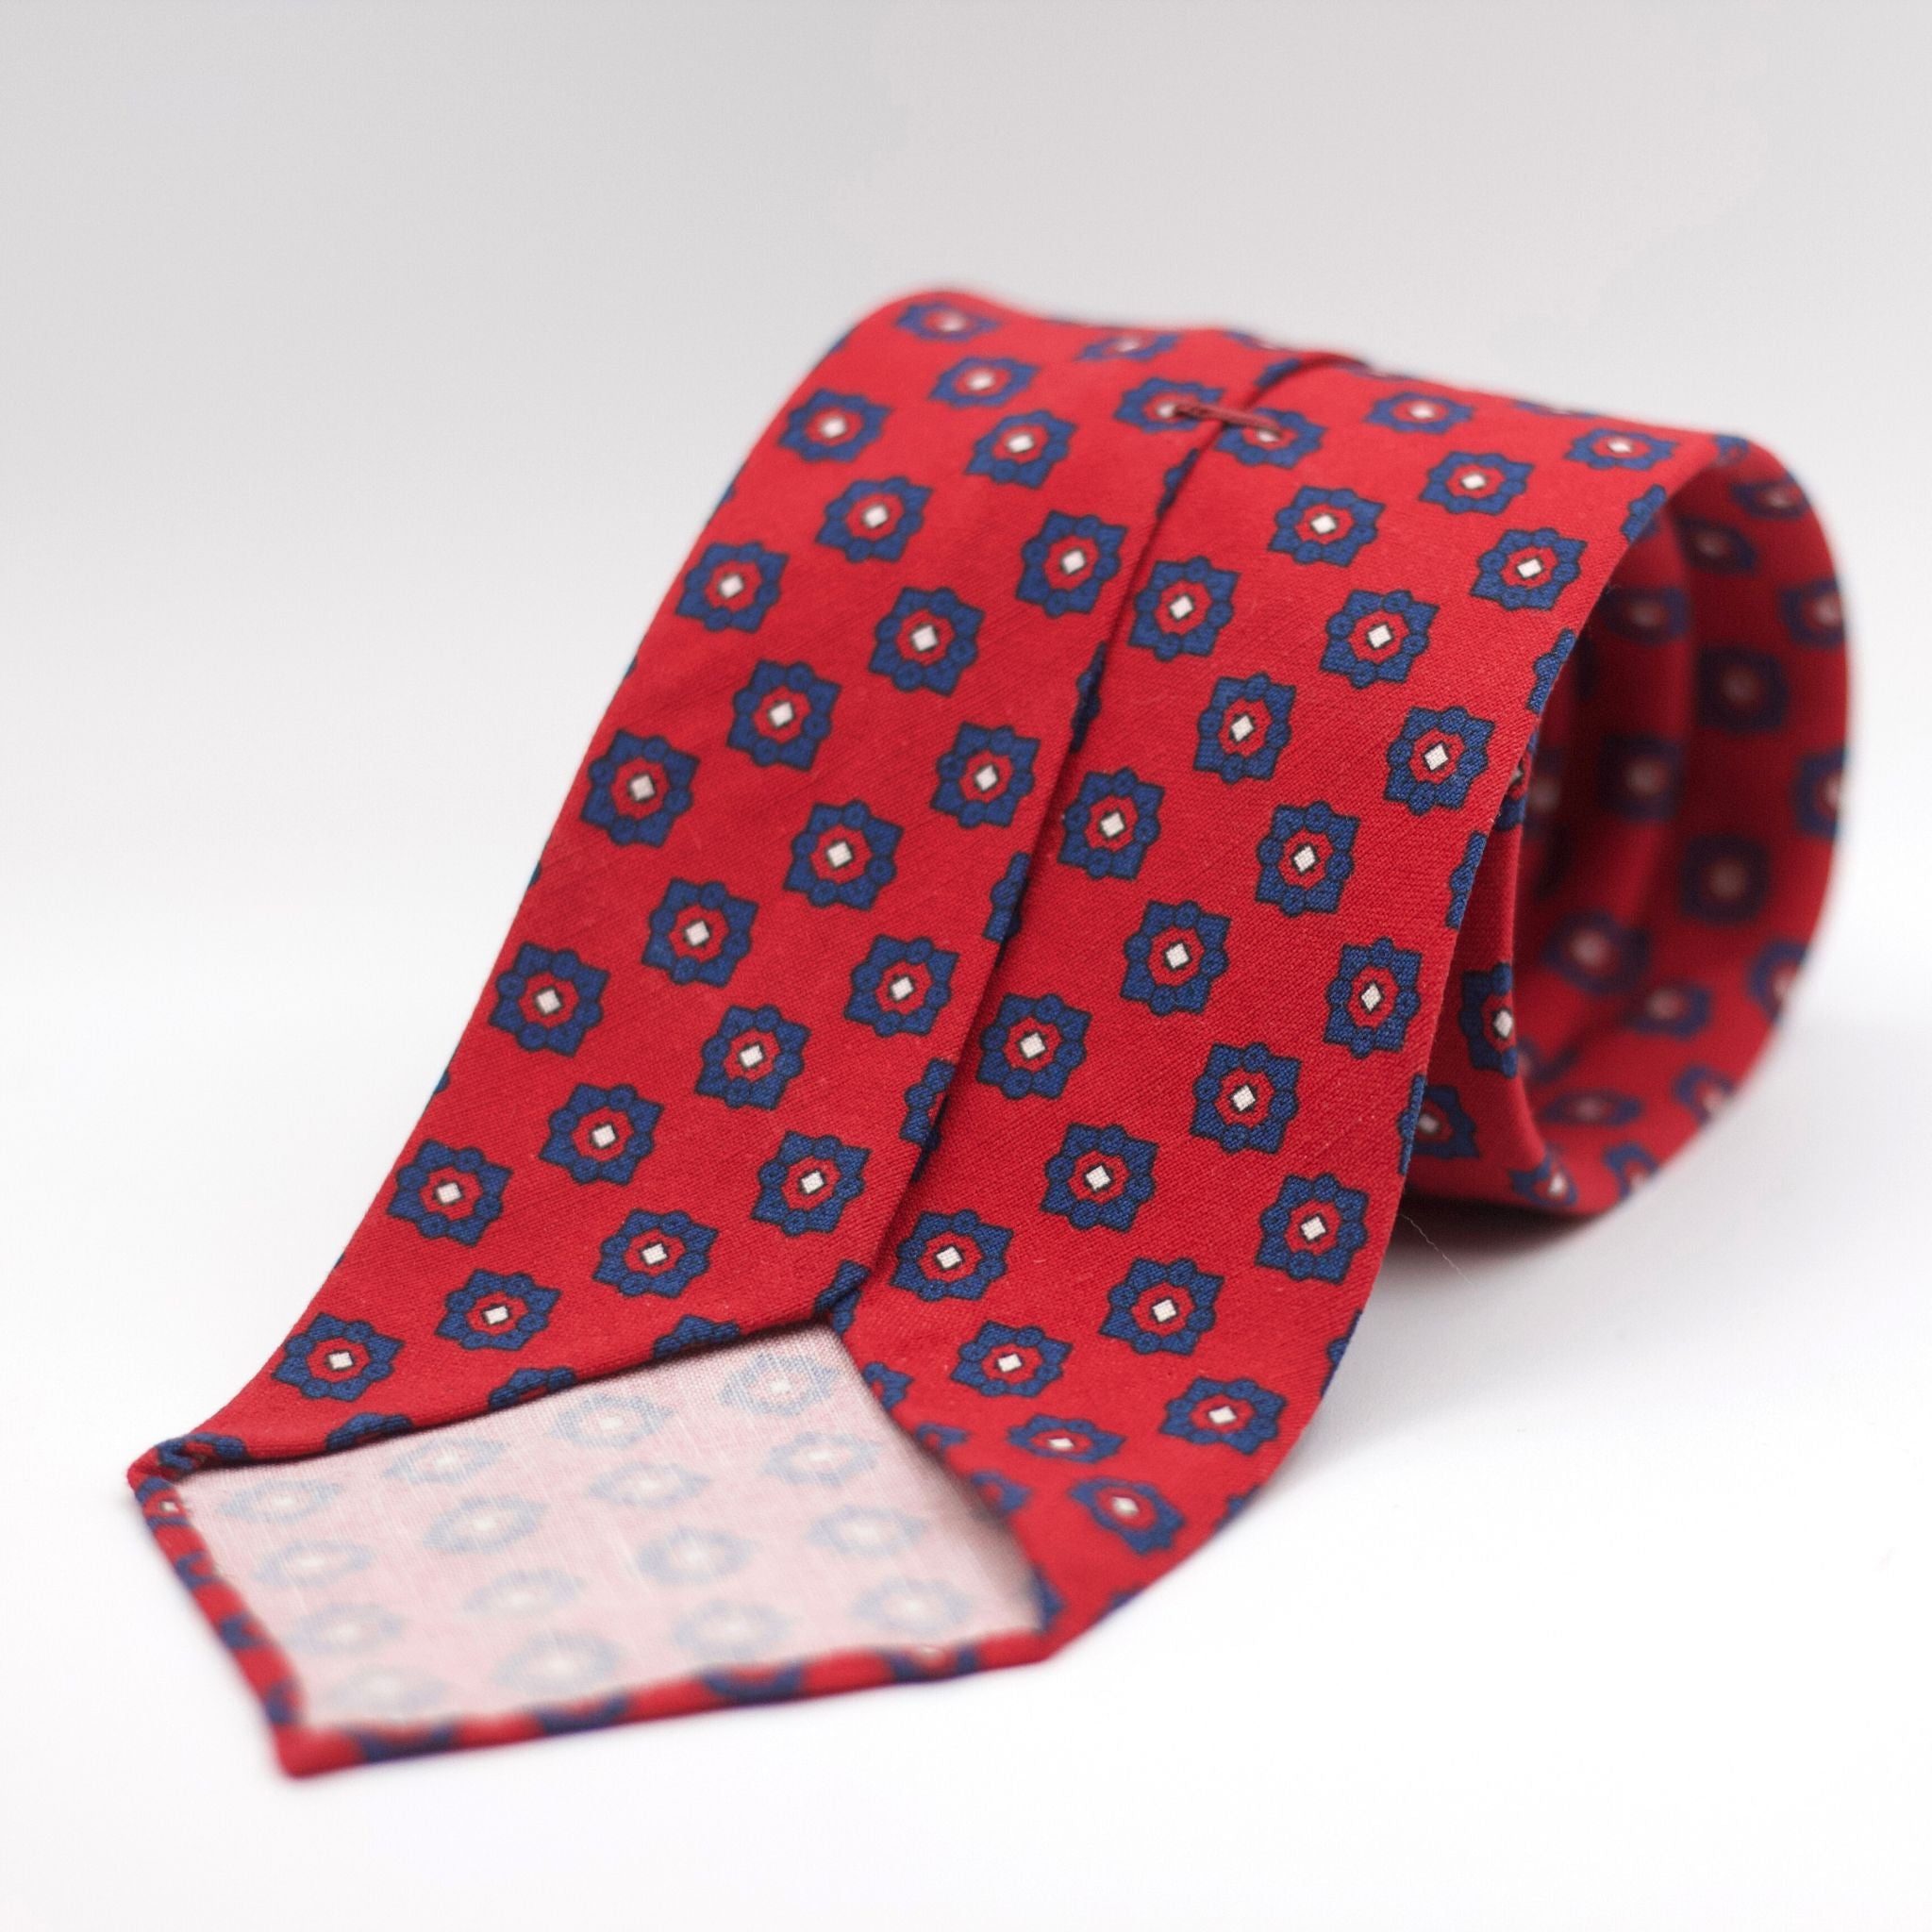 Cruciani & Bella 100% Printed Madder Linen and Silk  Italian fabric Unlined tie Red, Blue and White Unlined Tie Handmade in Italy 8 cm x 150 cm